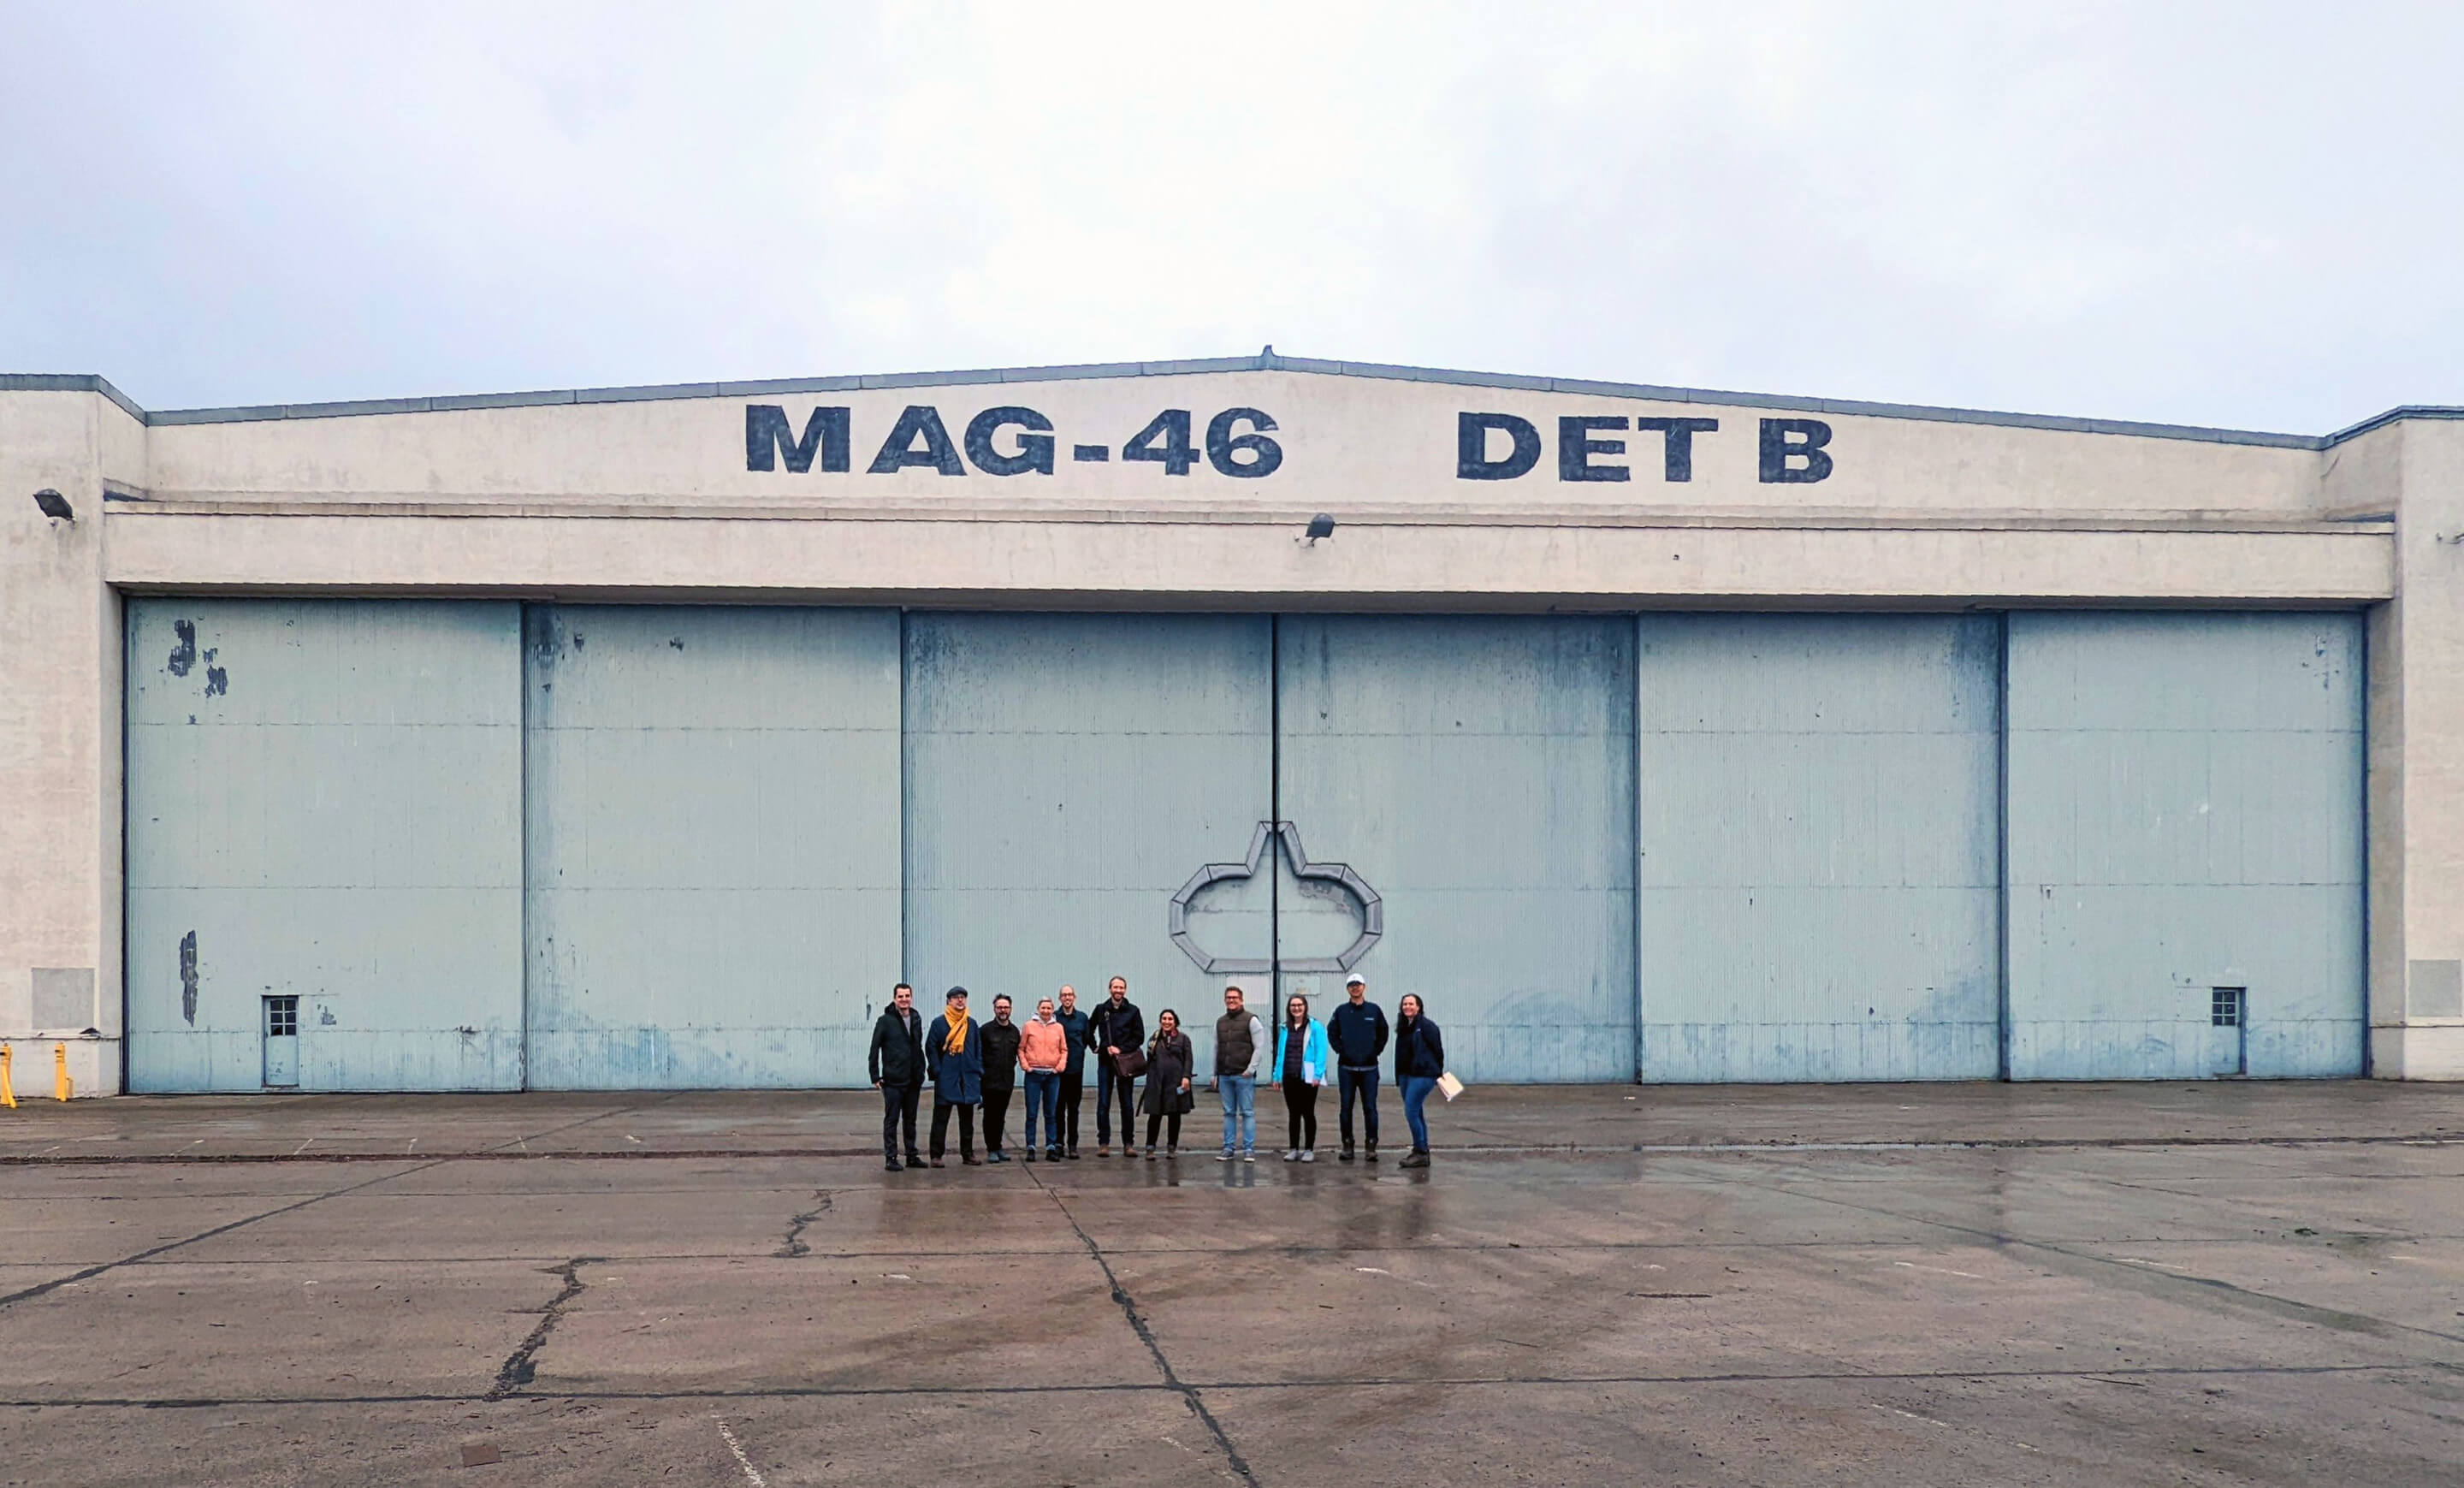 group of people stand in front of an old military aviation hangar